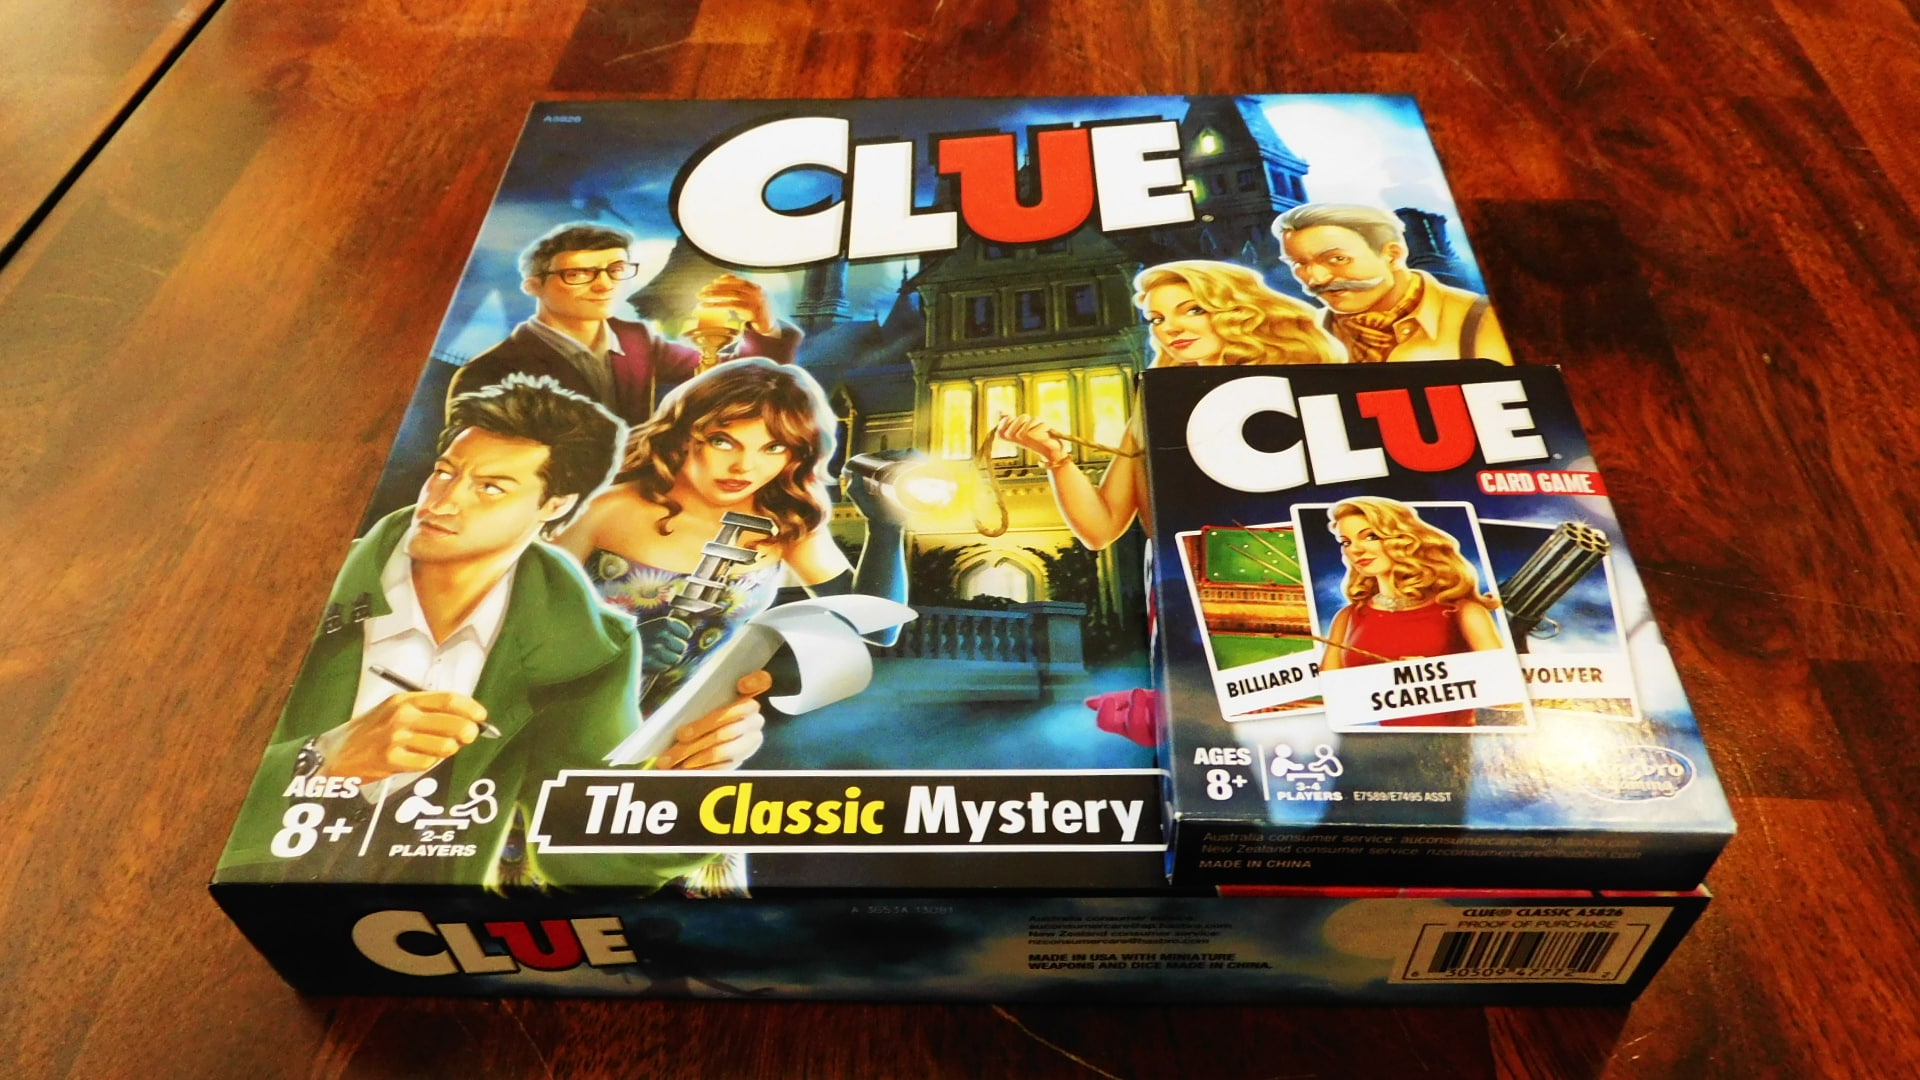 The game boxes for Clue and Clue: The Card Game